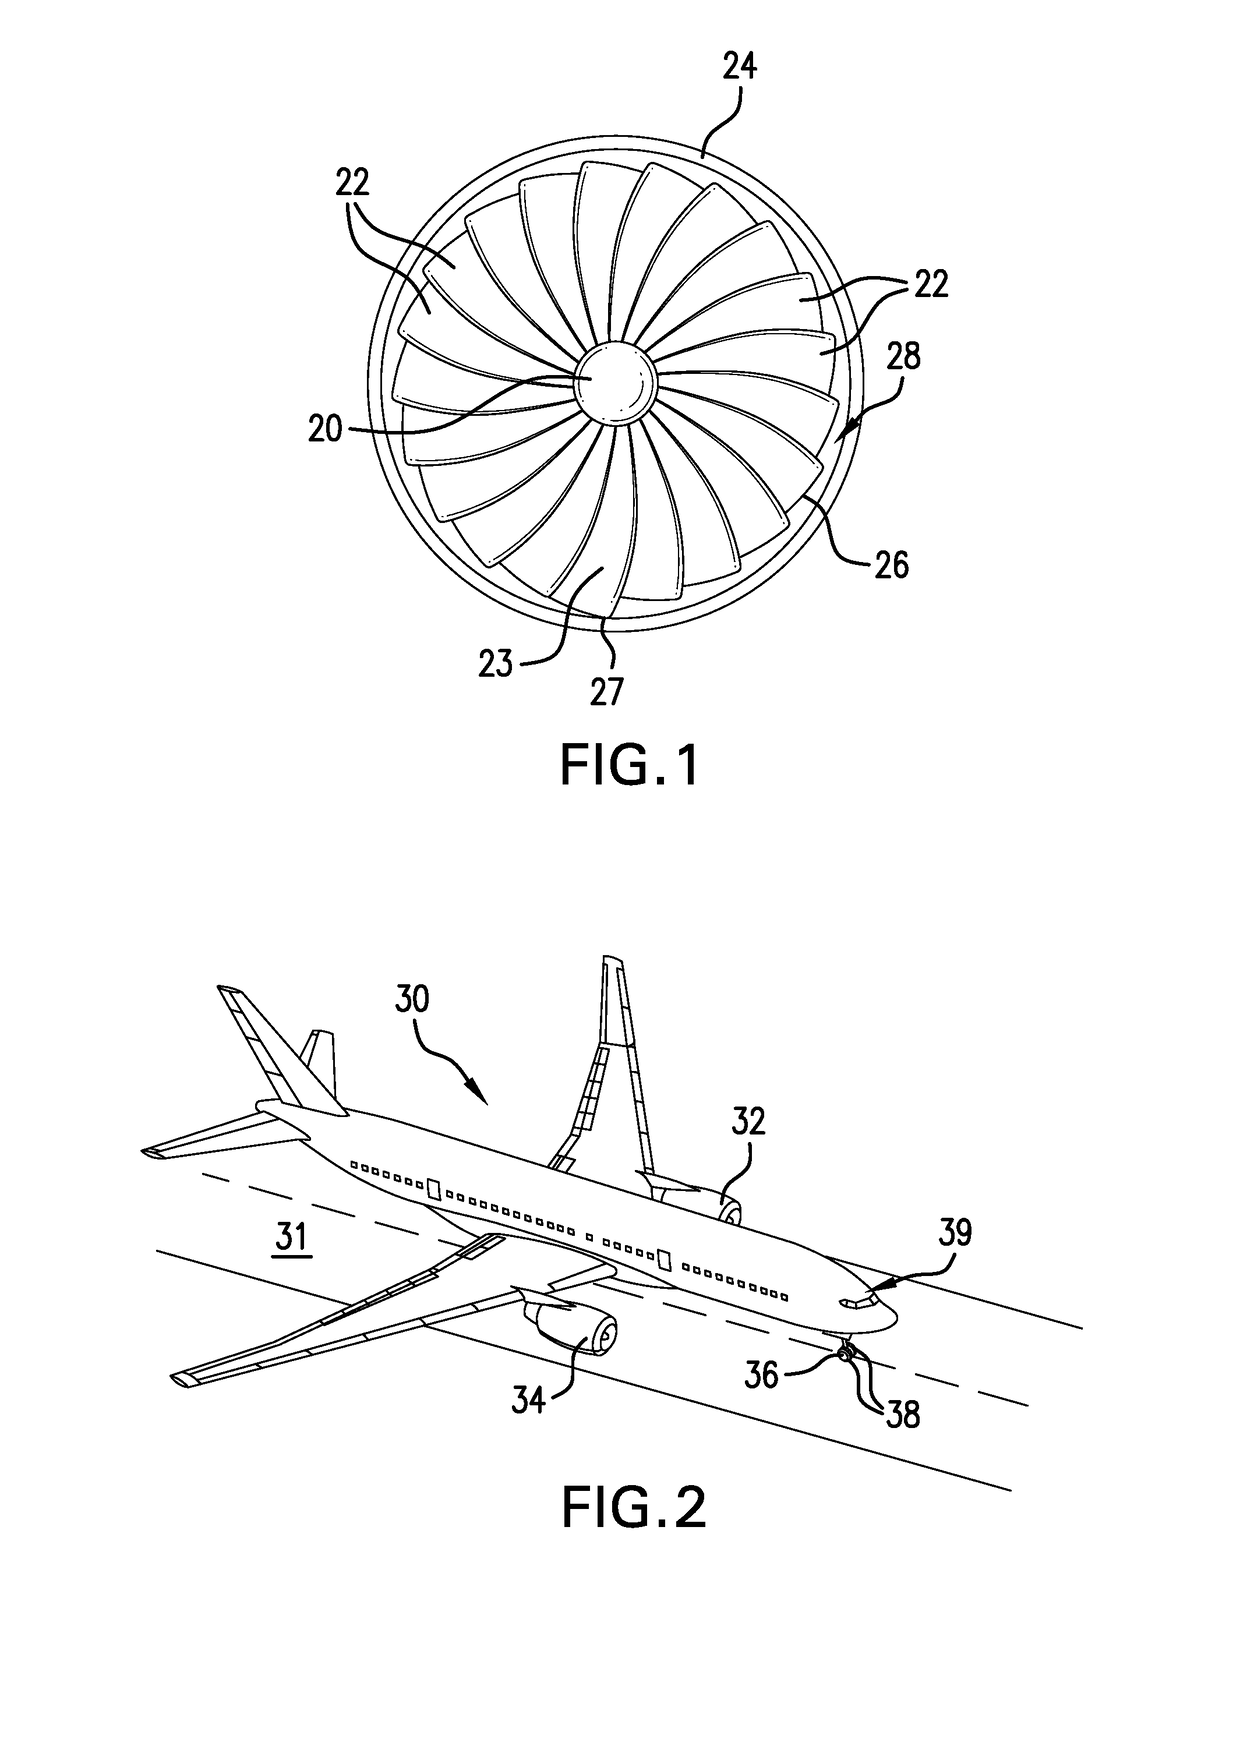 Method for Improving Aircraft Engine Operating Efficiency